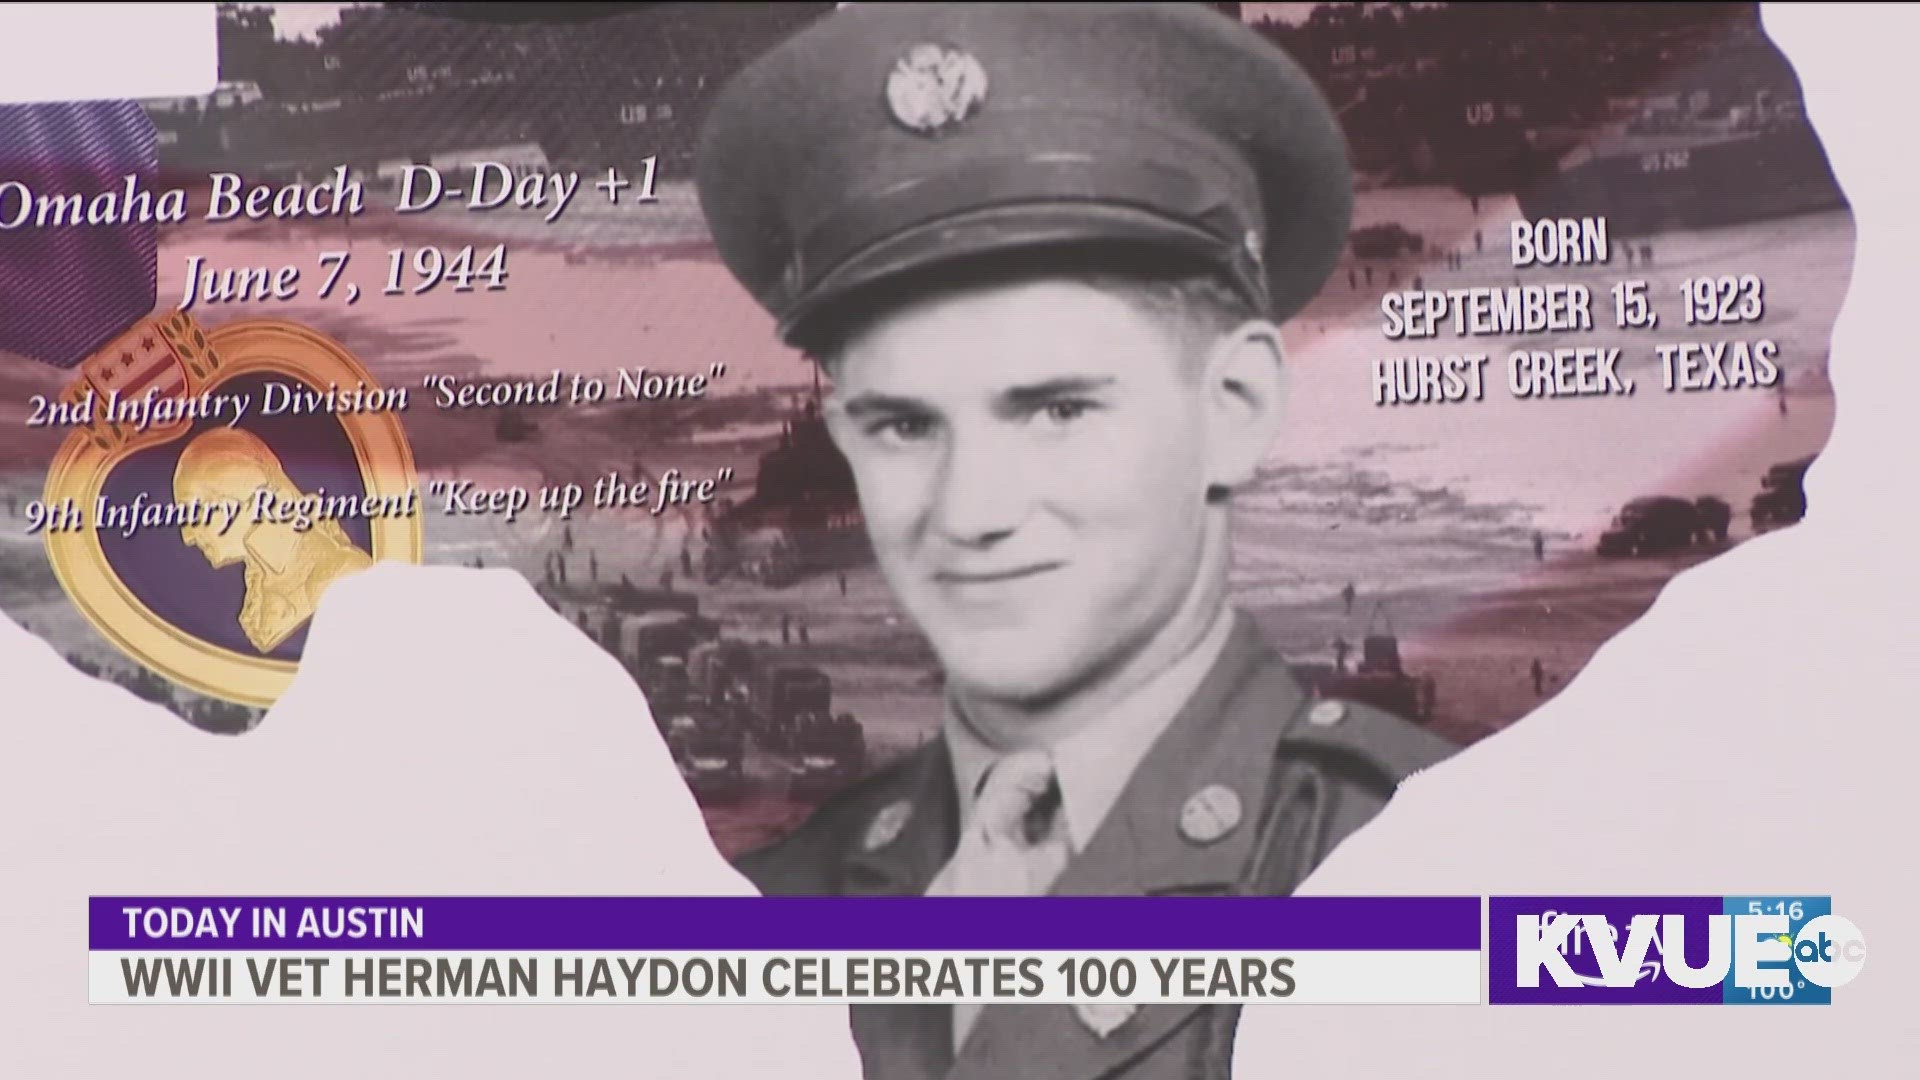 Herman Haydon grew up where Lake Travis is now in a log cabin, and joined the U.S. Army after Pearl Harbor.